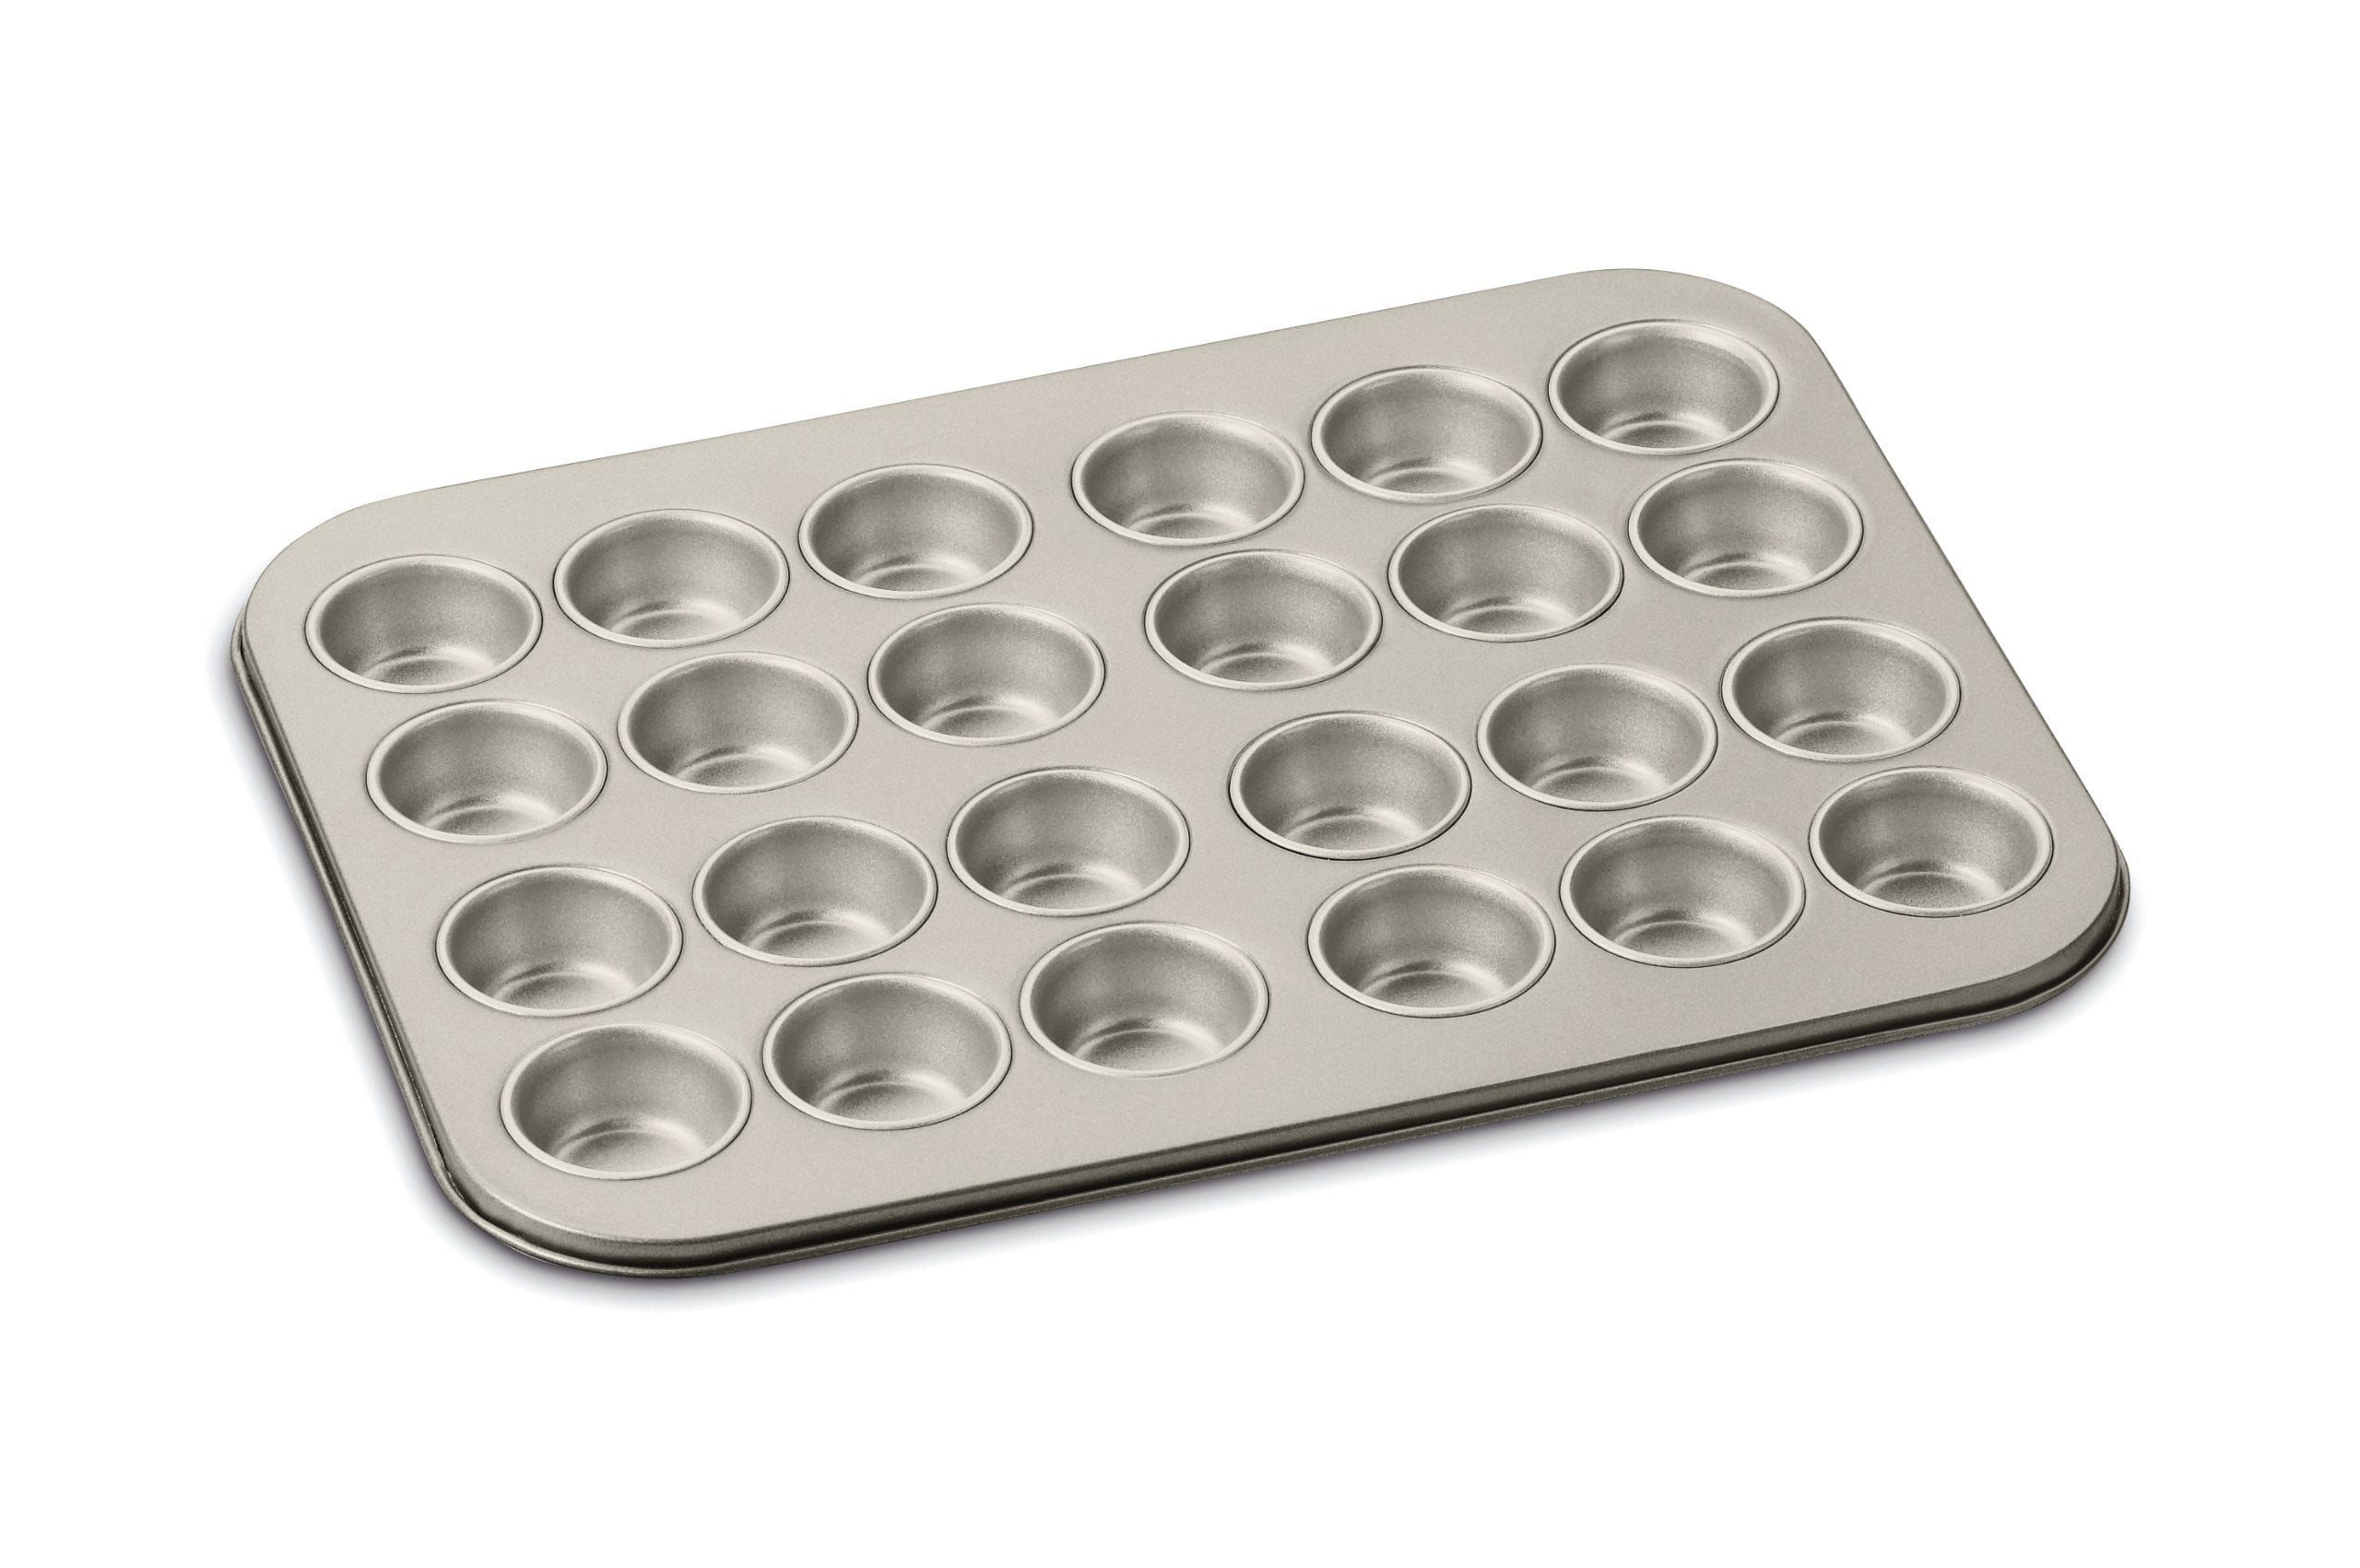 NEW CUISINART CHEF'S CLASSIC 6-CUP MUFFIN TOP PAN SILVER NON STICK BAKEWARE